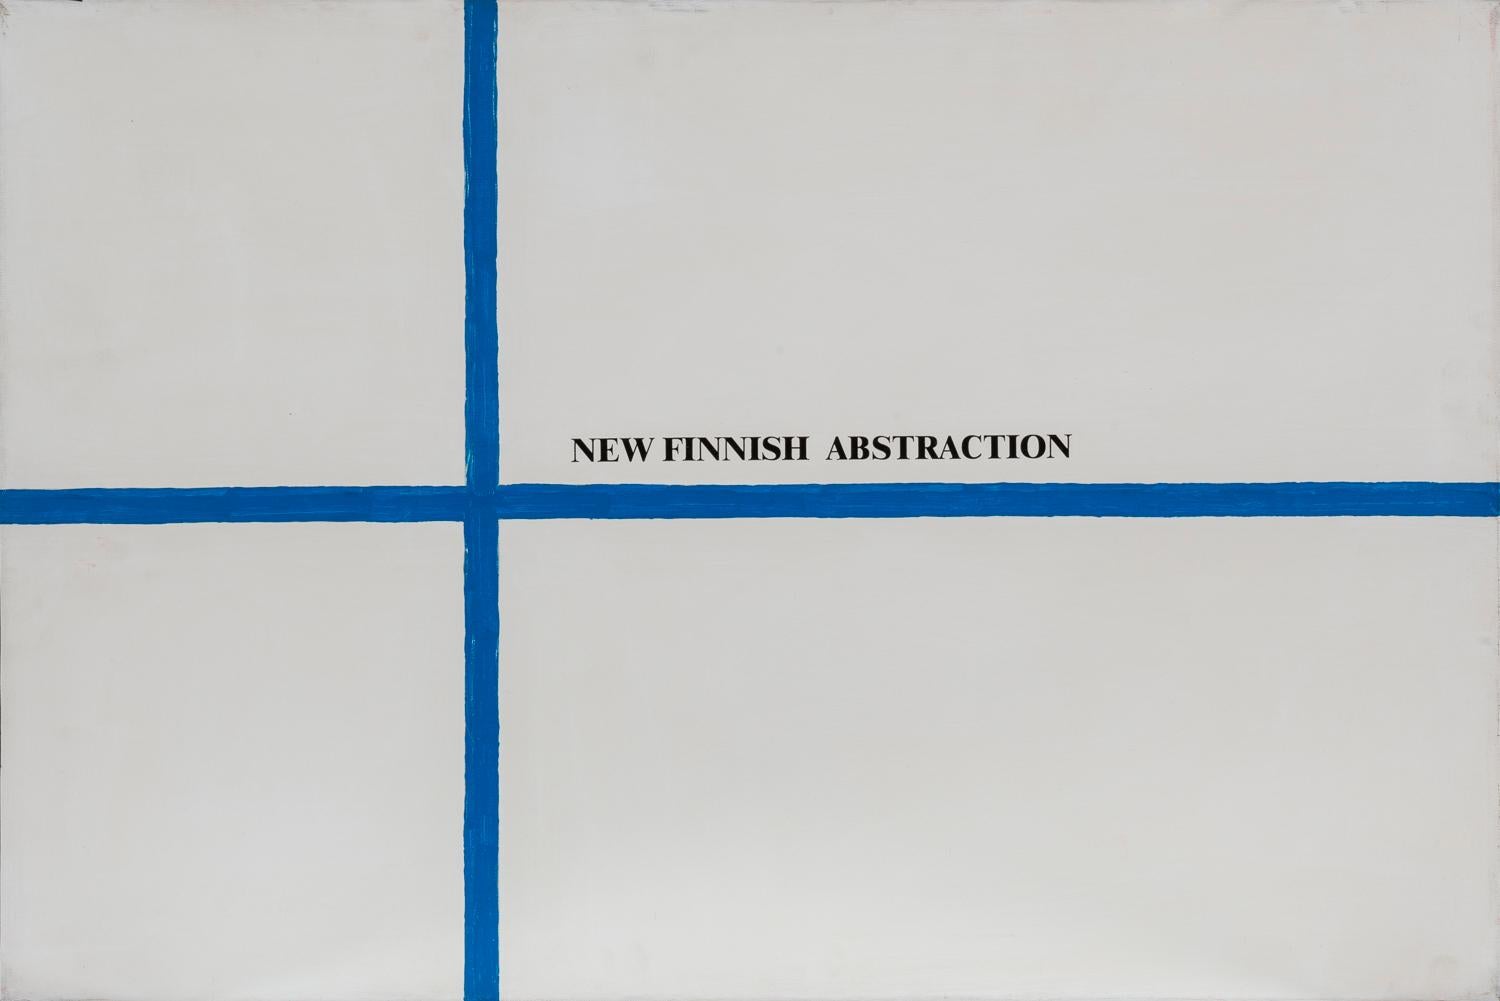 New Finnish Abstraction, 1972-2002, Acrylic on canvas, Flags, Visual Poetry - Painting by Sarenco